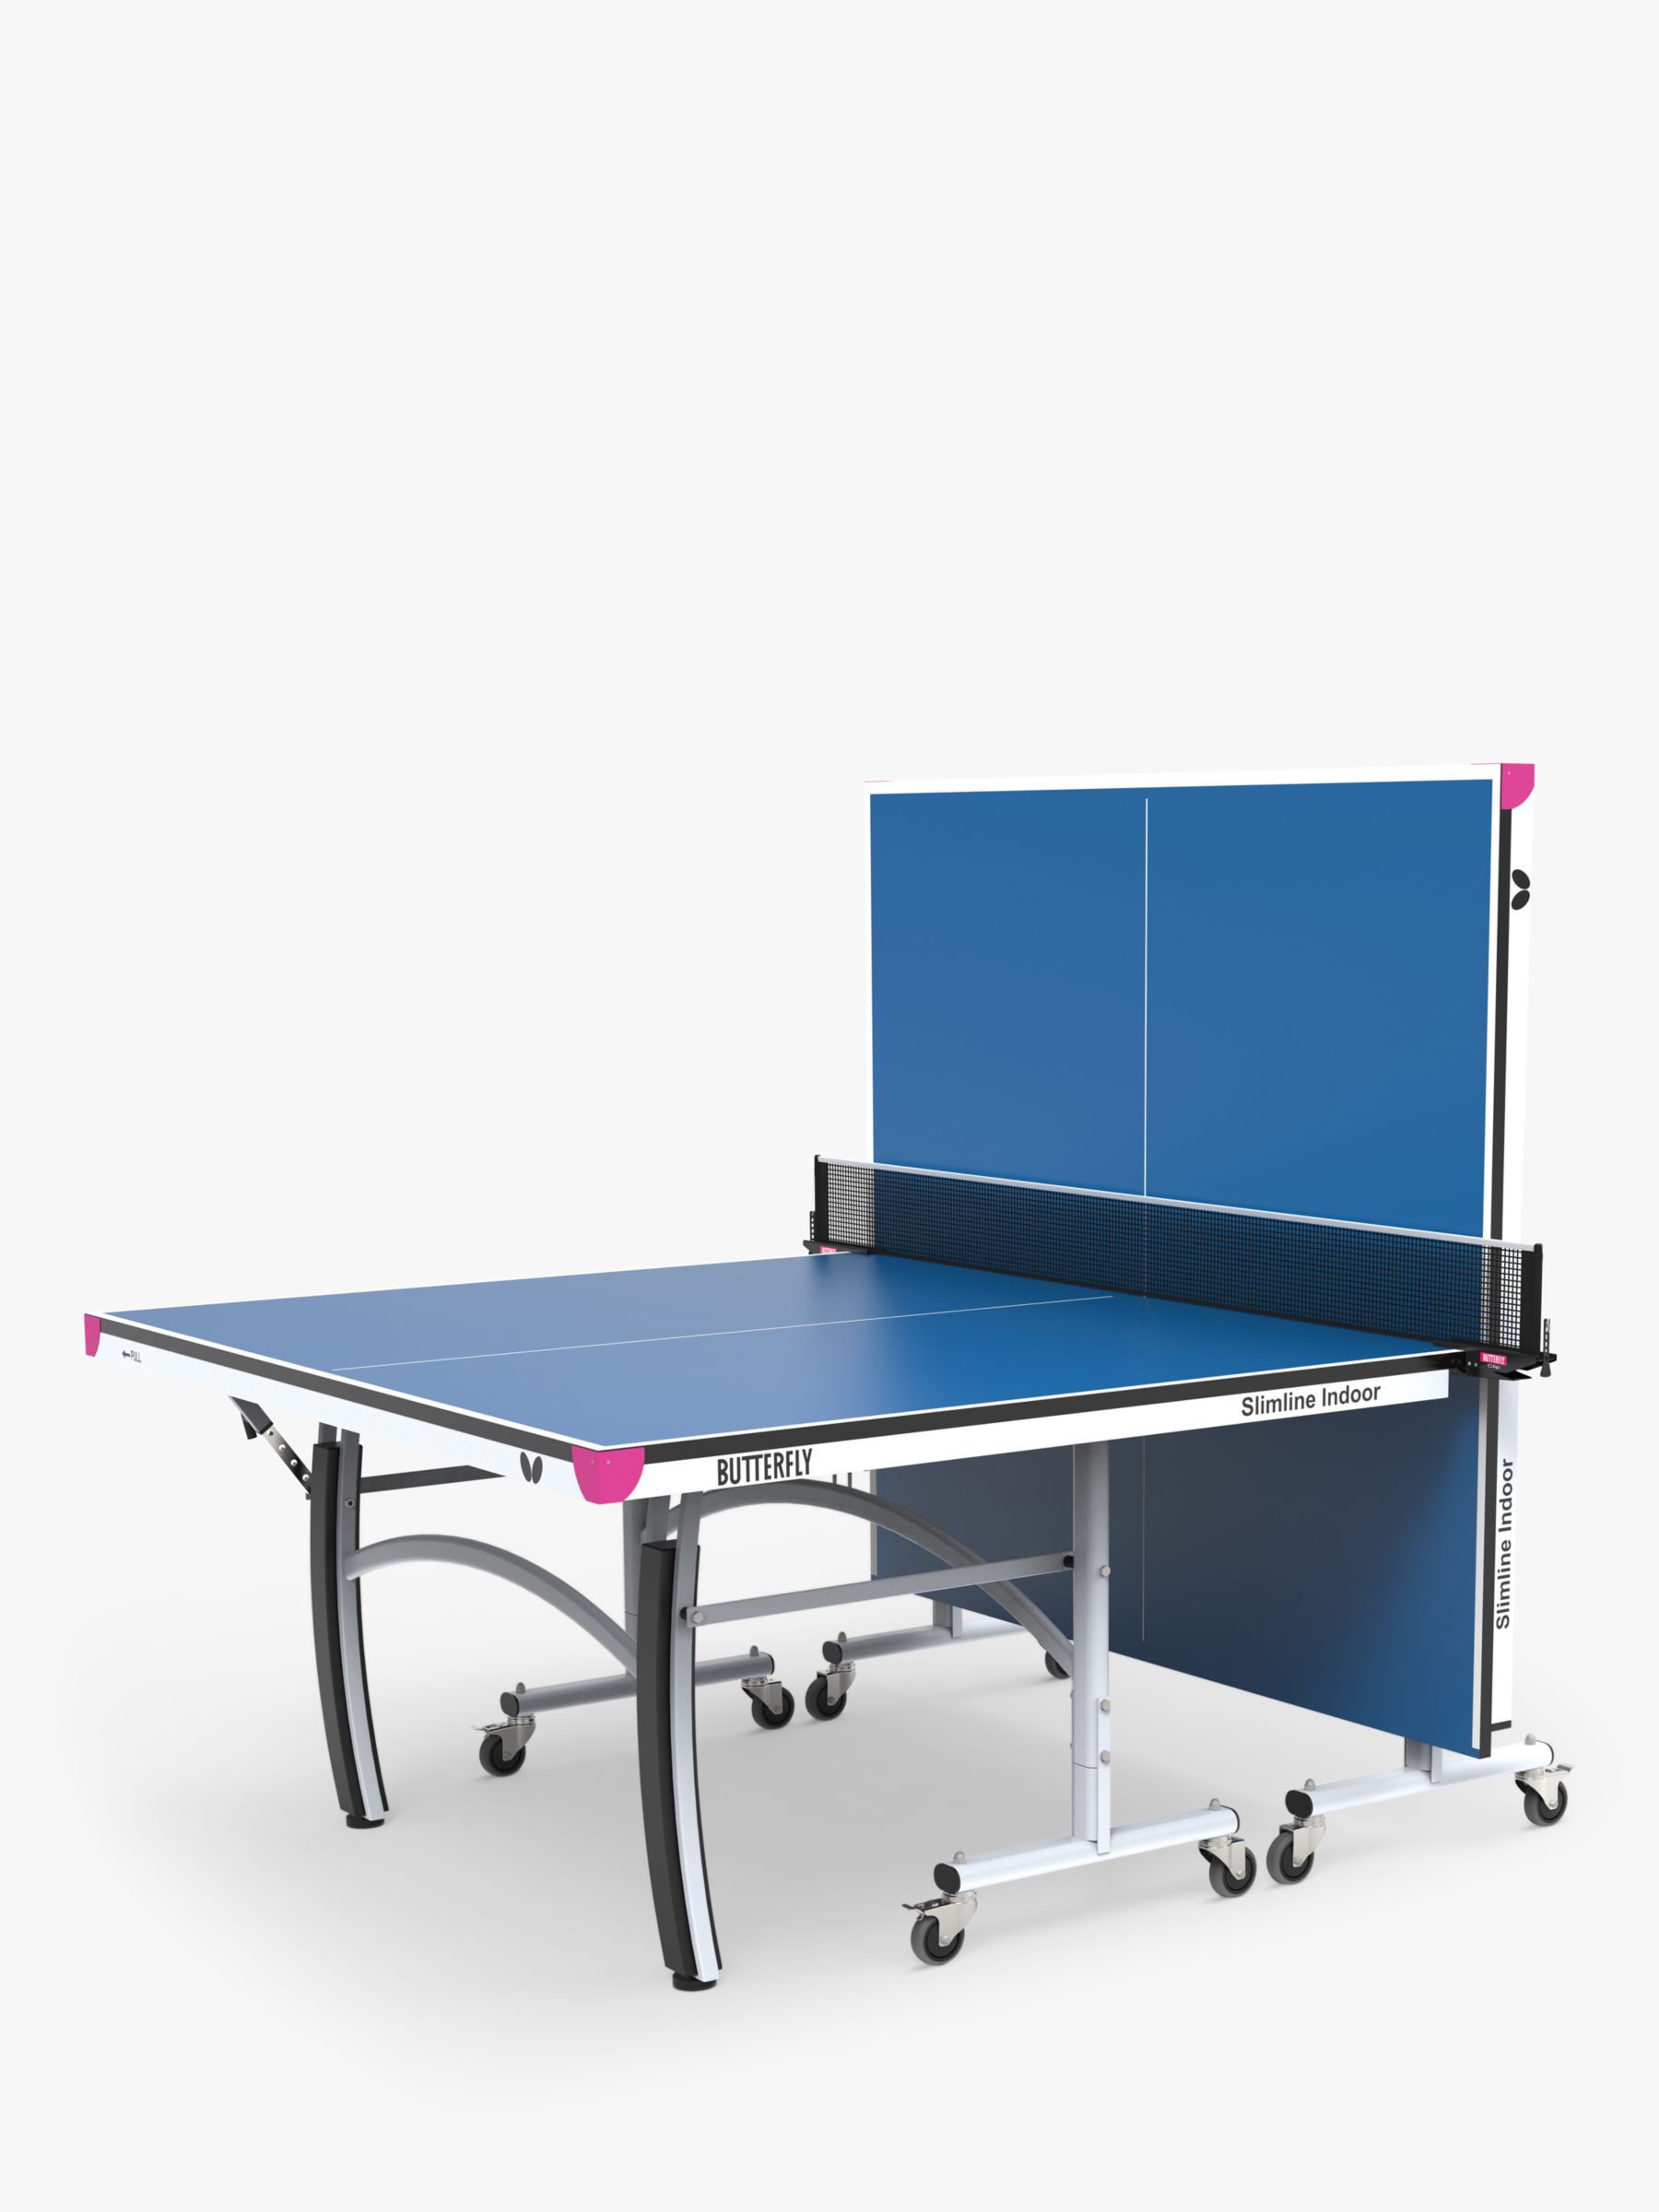 Les dimensions d'une table de ping-pong - Chill out with Toulet